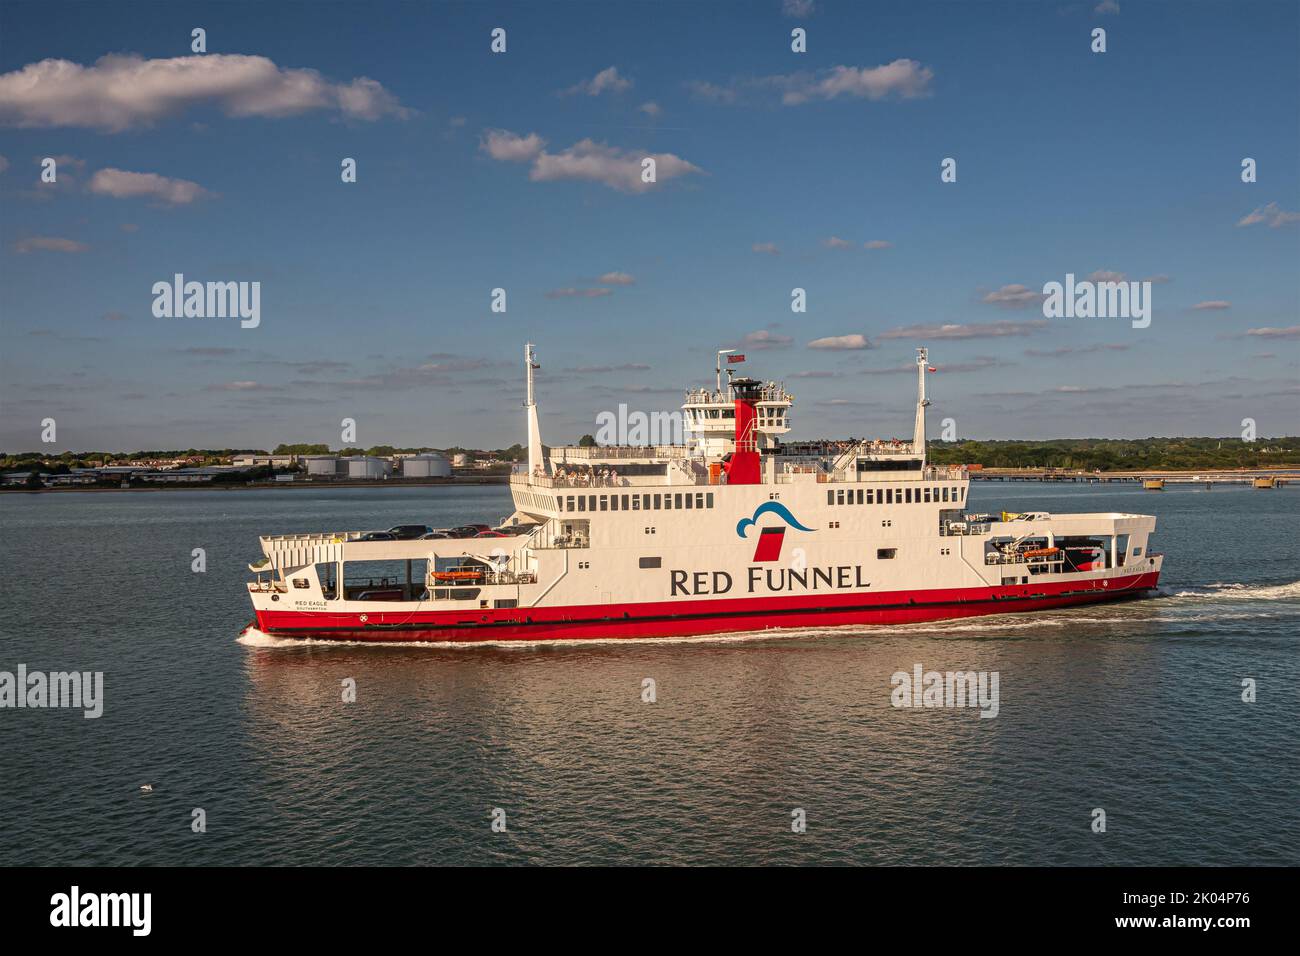 Southampton, England, UK - July 7, 2022: Closeup, Red Funnel ferry traverses East Cowes blue water under blue cloudscape with port installations on ho Stock Photo